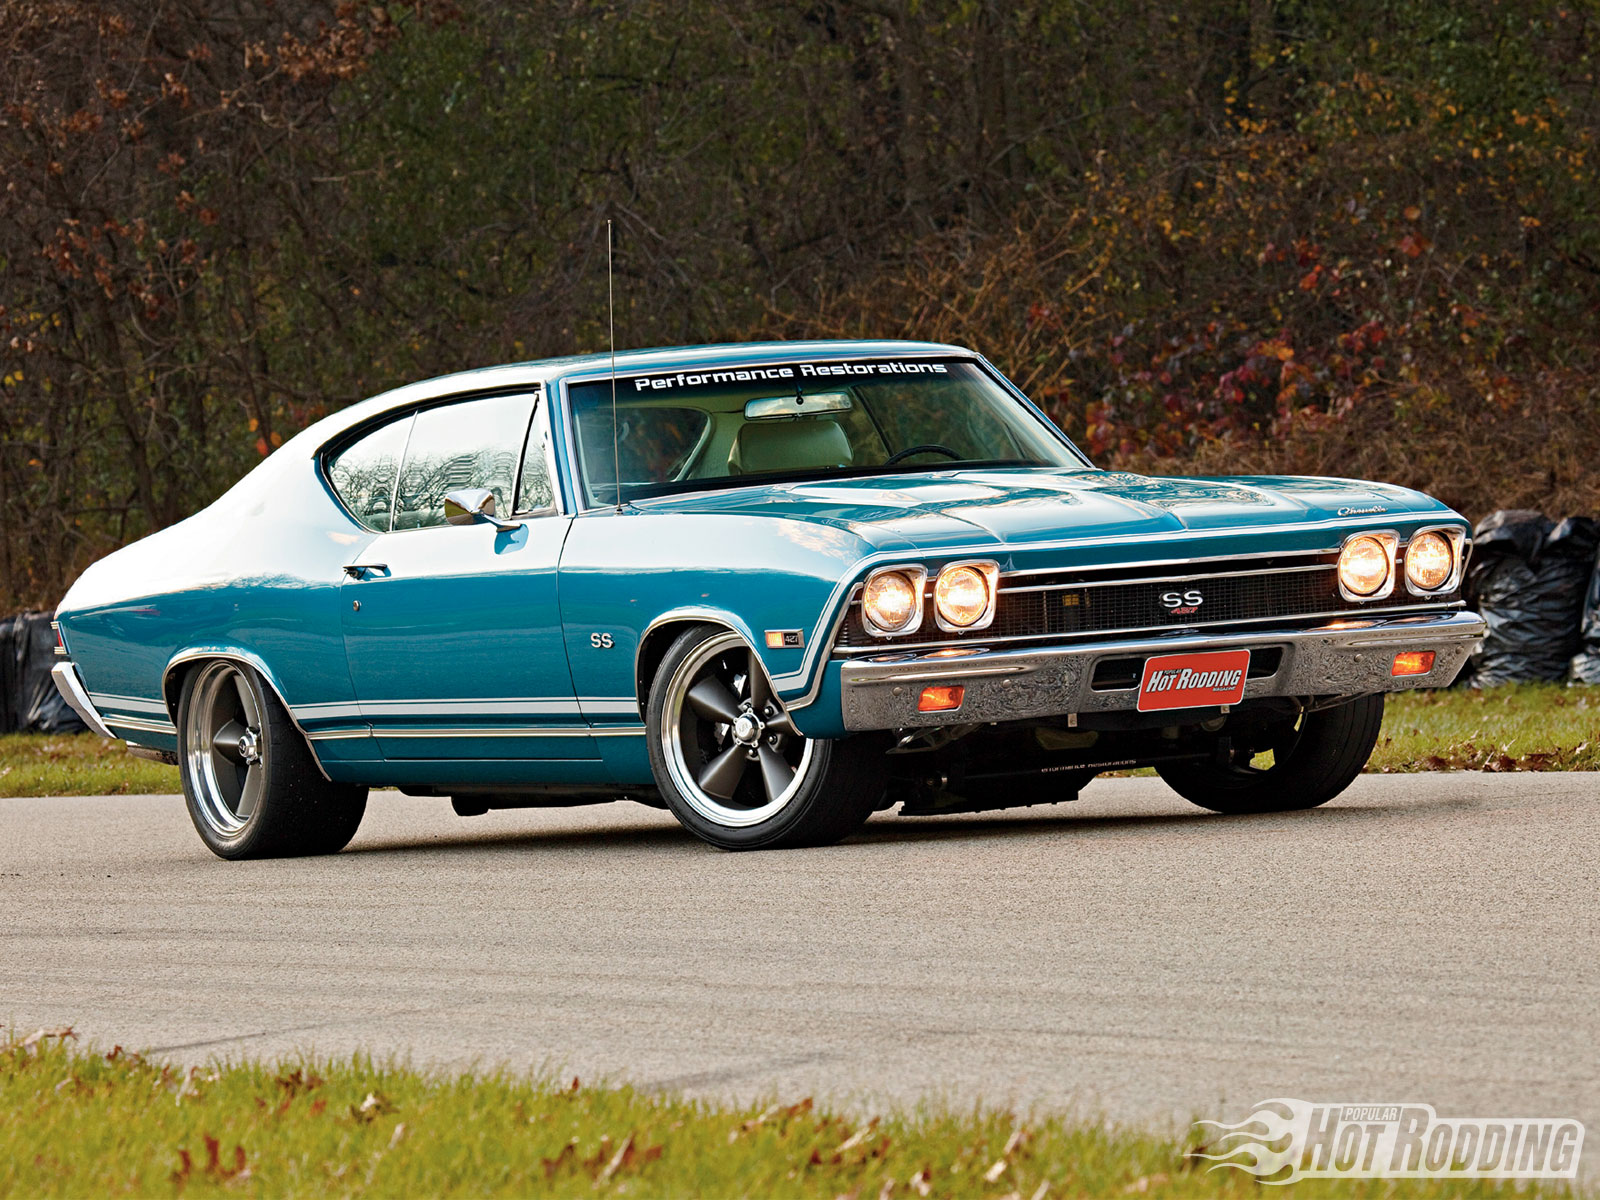 Chevy Chevelle SS 900 hp Computer Wallpapers Desktop Backgrounds 1600x1200